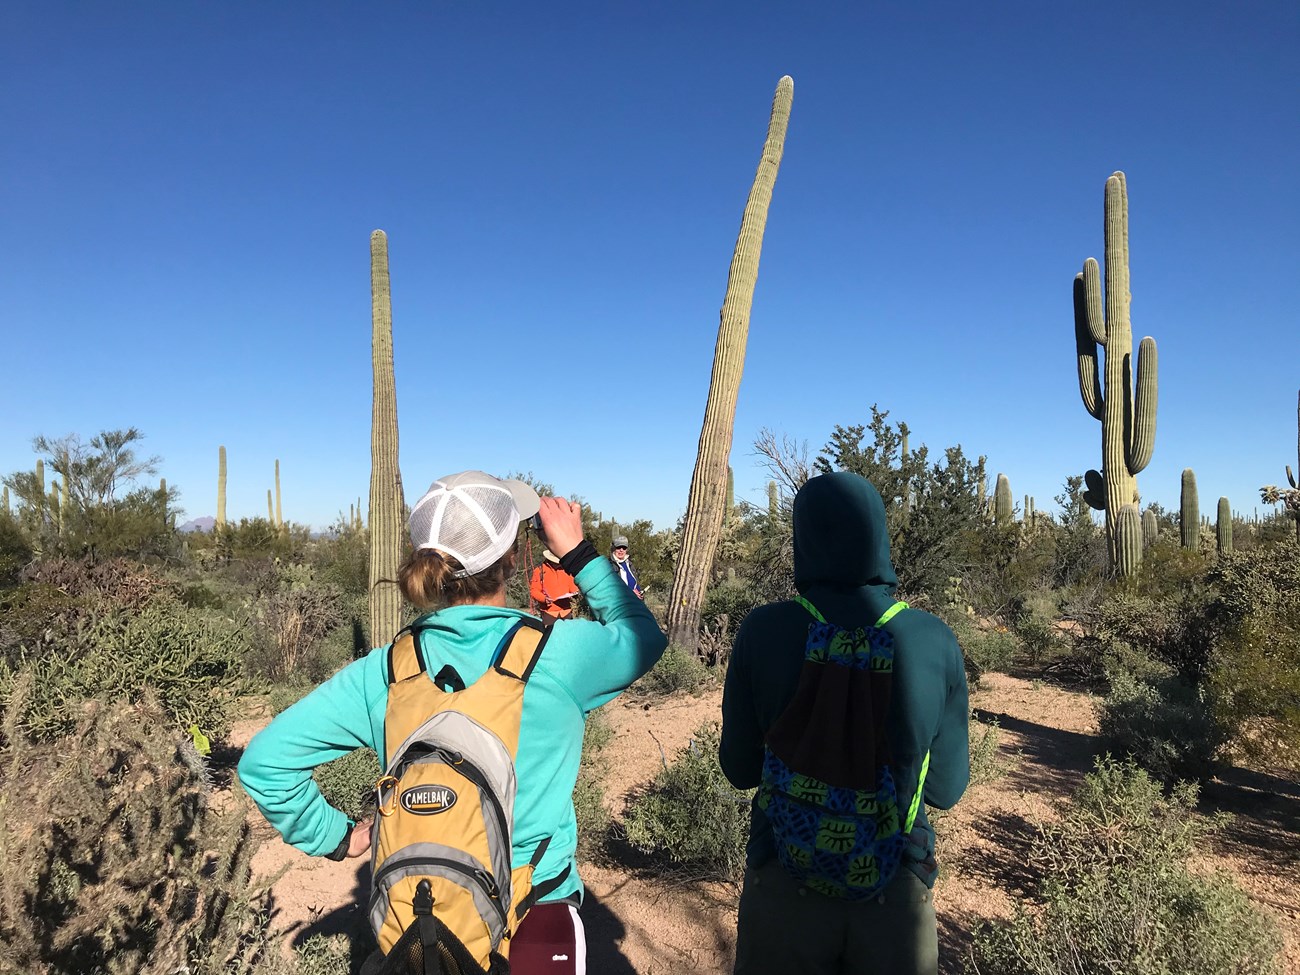 A woman using a clinometer to measure the height of a tall saguaro in front of her.